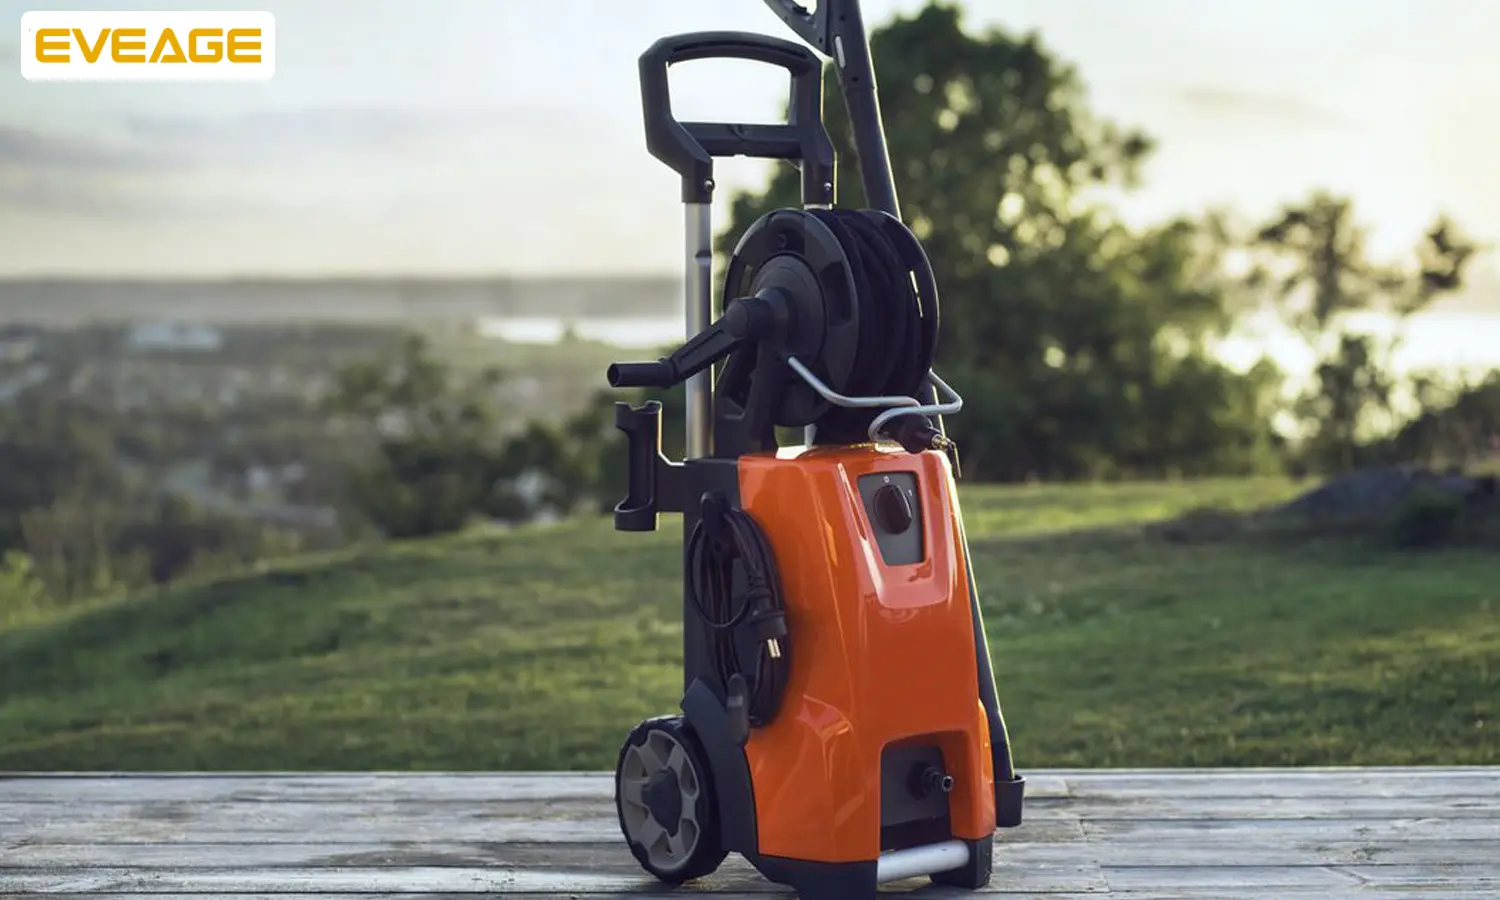 What is The Best Pressure Washer to Buy